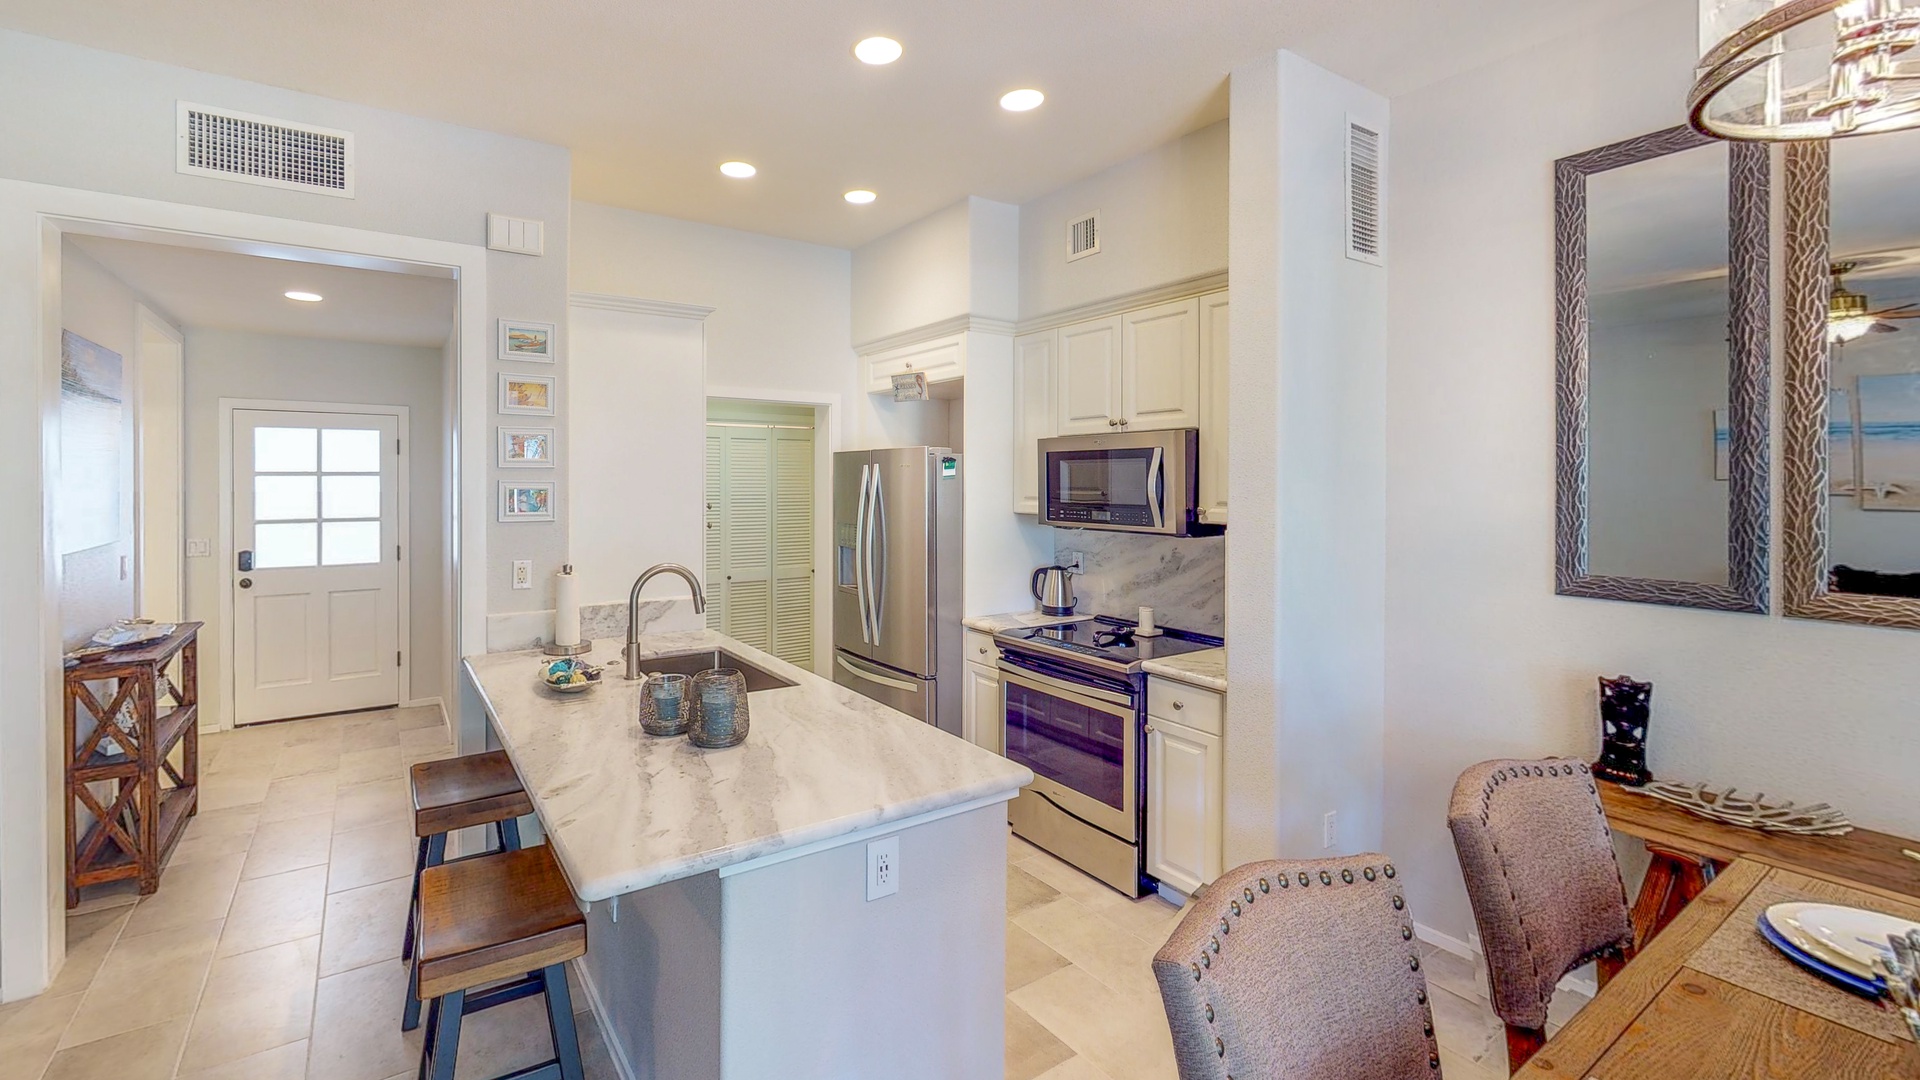 Kapolei Vacation Rentals, Coconut Plantation 1222-3 - The spacious kitchen has all your needs for a relaxing vacation.